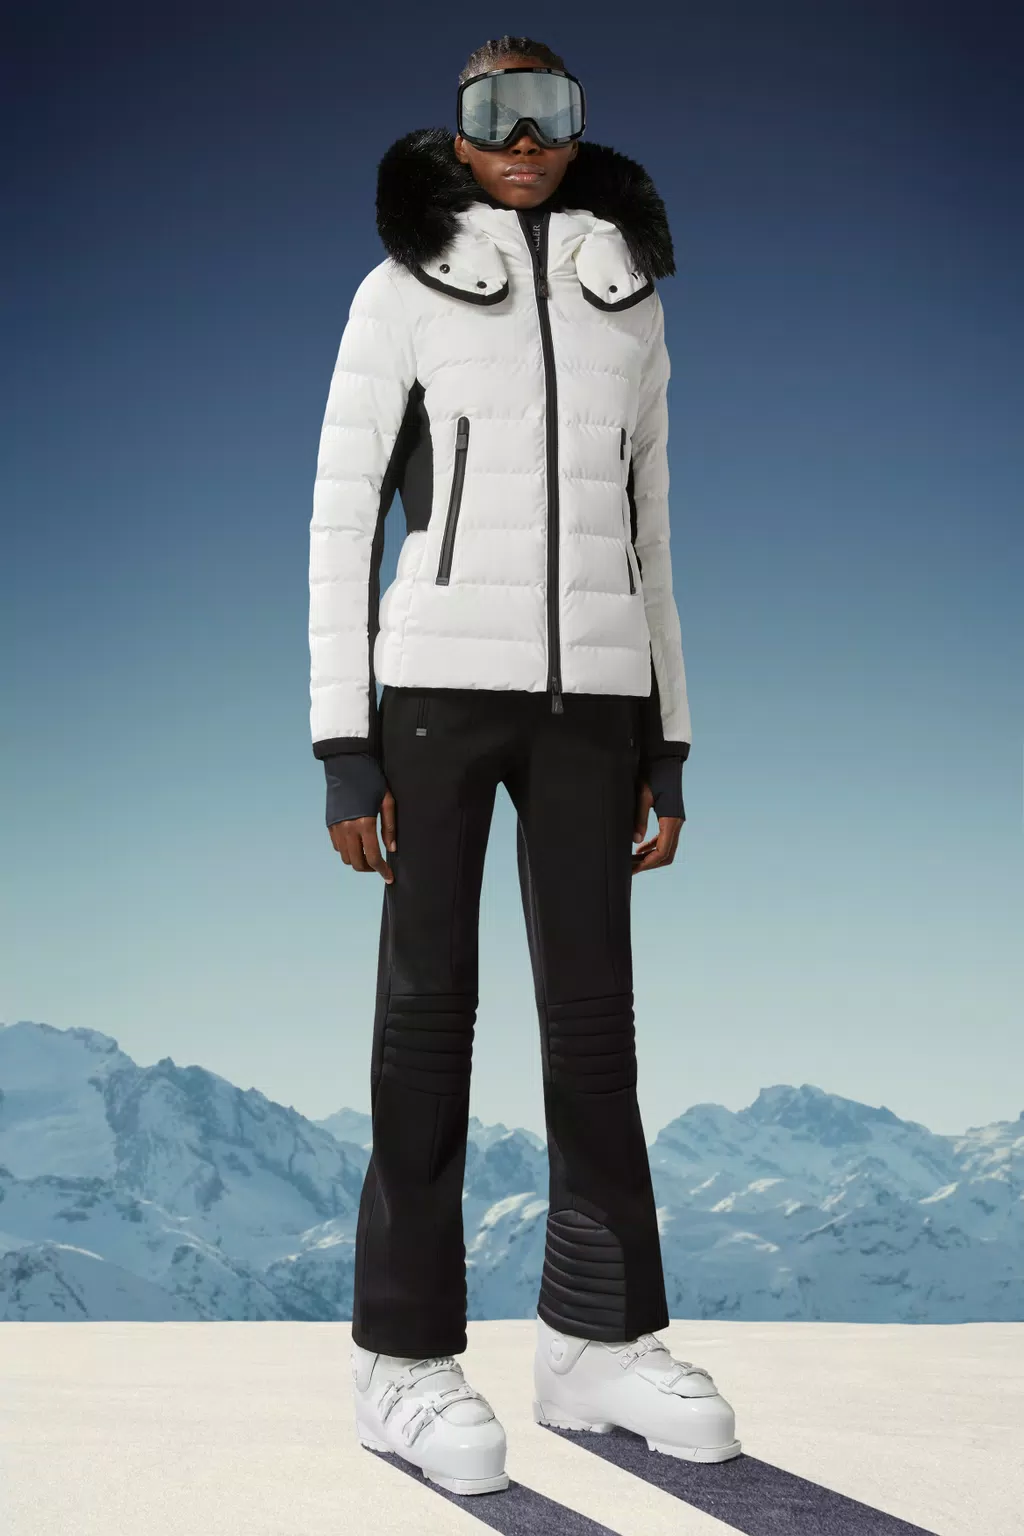 https://moncler-cdn.thron.com/delivery/public/image/moncler/I20981A0004053861P09_X/dpx6uv/std/1024x1536/lamoura-short-down-jacket-women-black-and-white-moncler.jpg?scalemode=centered&adjustcrop=reduce&quality=80&format=WEBP